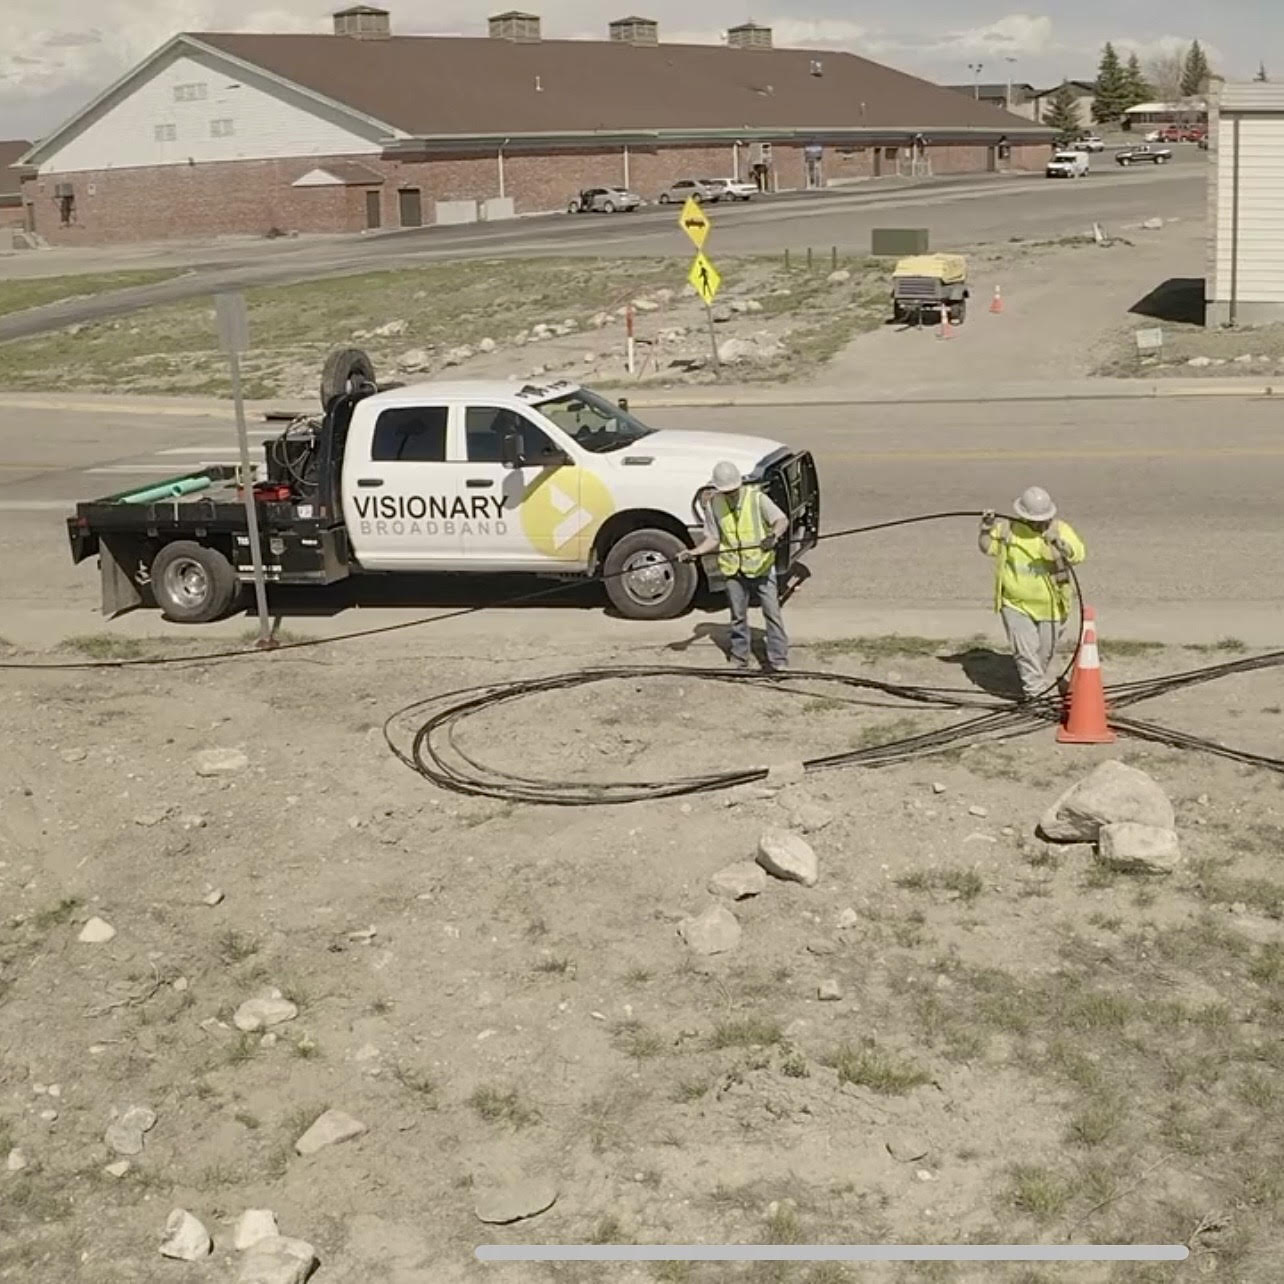 Featured image for “Visionary Broadband Adds Hundreds of Miles of Fiber Internet in Wyoming”